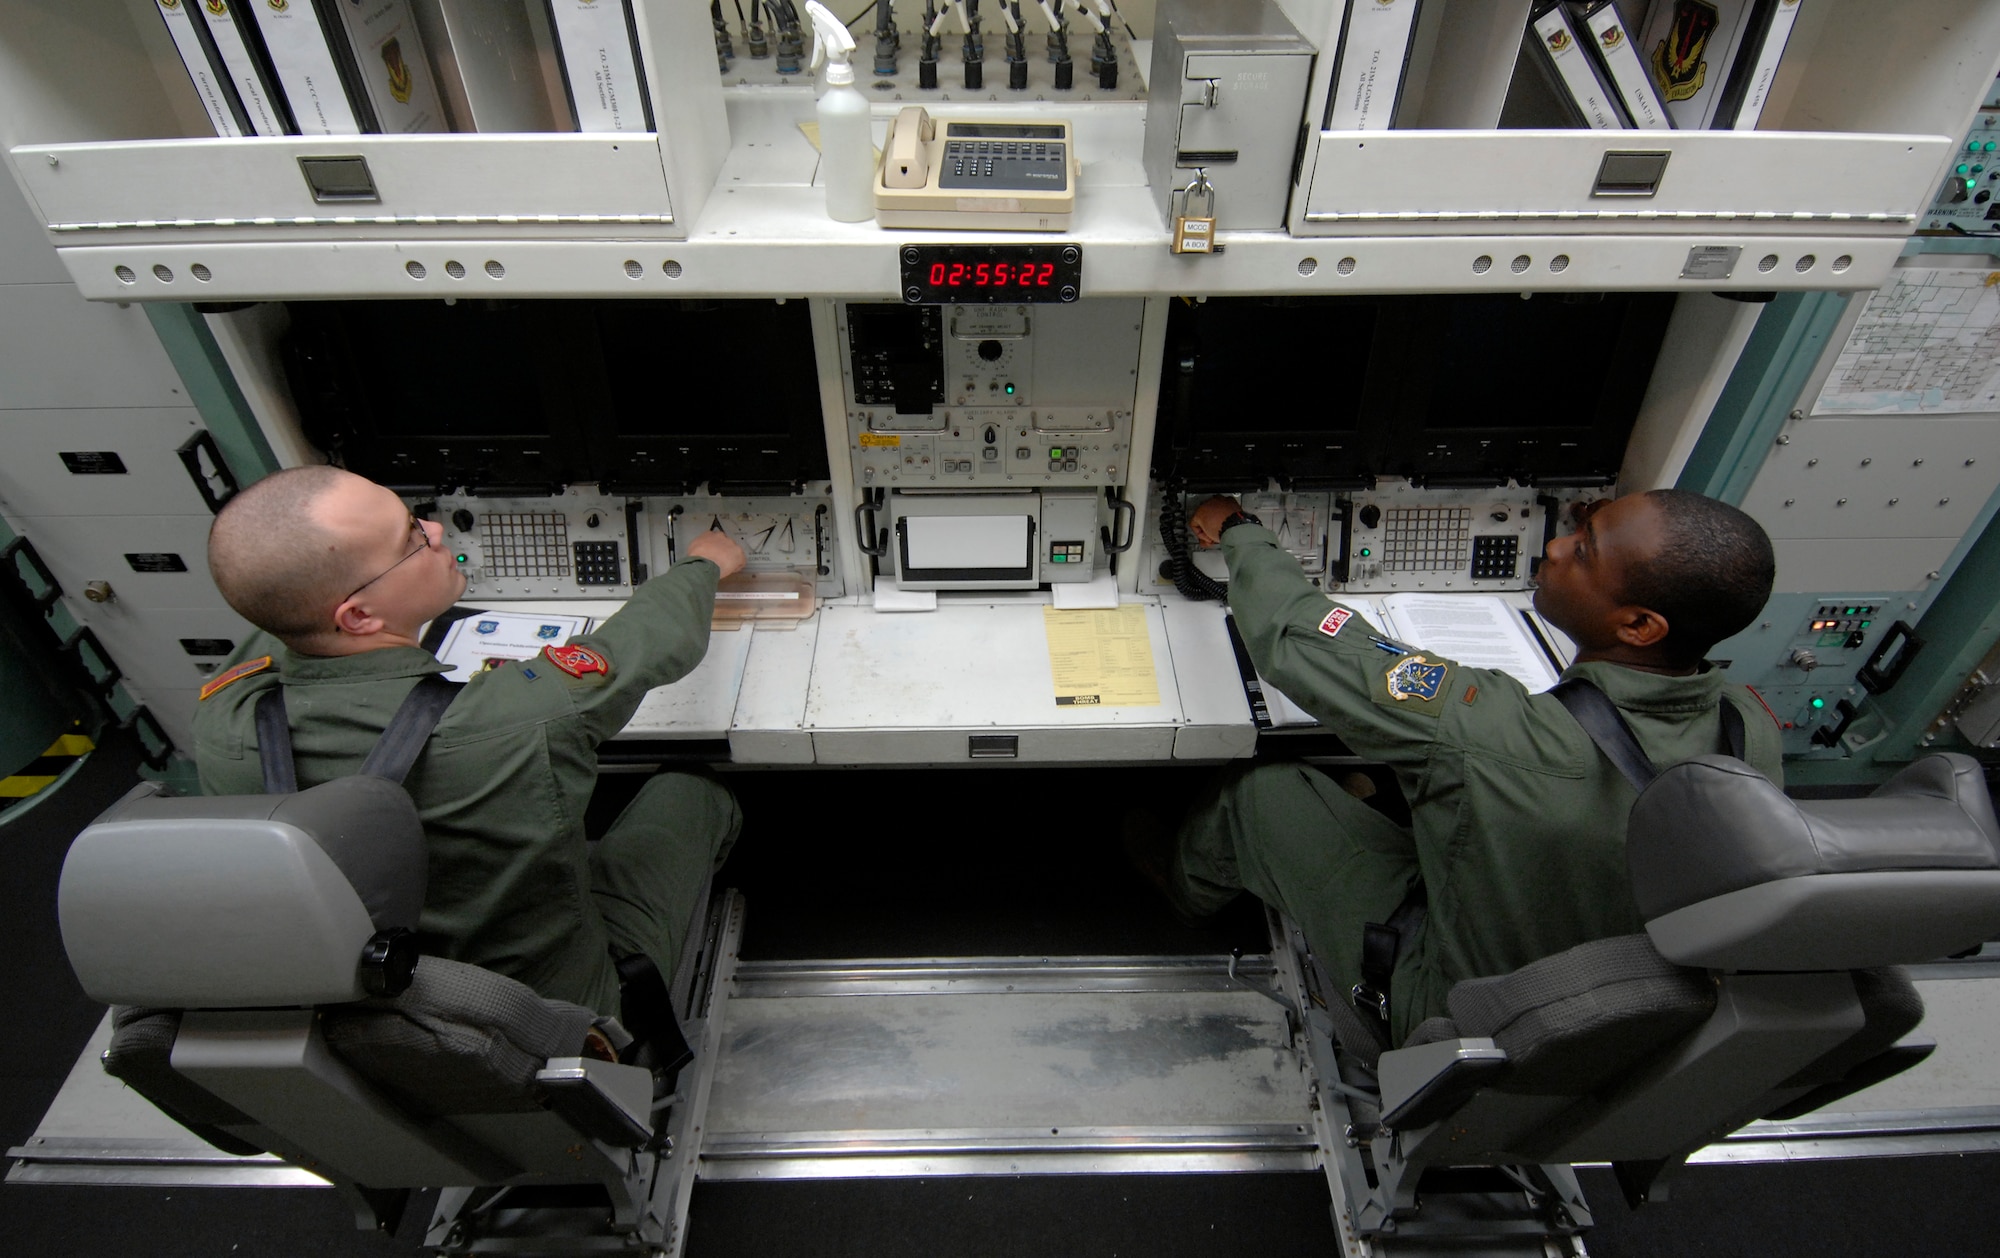 MINOT AIR FORCE BASE, N.D. -- 1st Lt. Jeremy King (left) and 2nd Lt. Glen Jasper (right), both from the 740th Missile Squadron, simulate launching a Minuteman III intercontinental ballistic missile at the missile procedure trainer here Sept. 24, 2009. The professionalism of the 740th MS crew commanders played an integral part in missile alert facility E-01 winning the Maj. Gen. M. C. “Tim” Padden Award for best Missile Alert Facilities in Air Force Space Command for 2009. (U.S. Air Force photo by Senior Airman Matthew Smith)